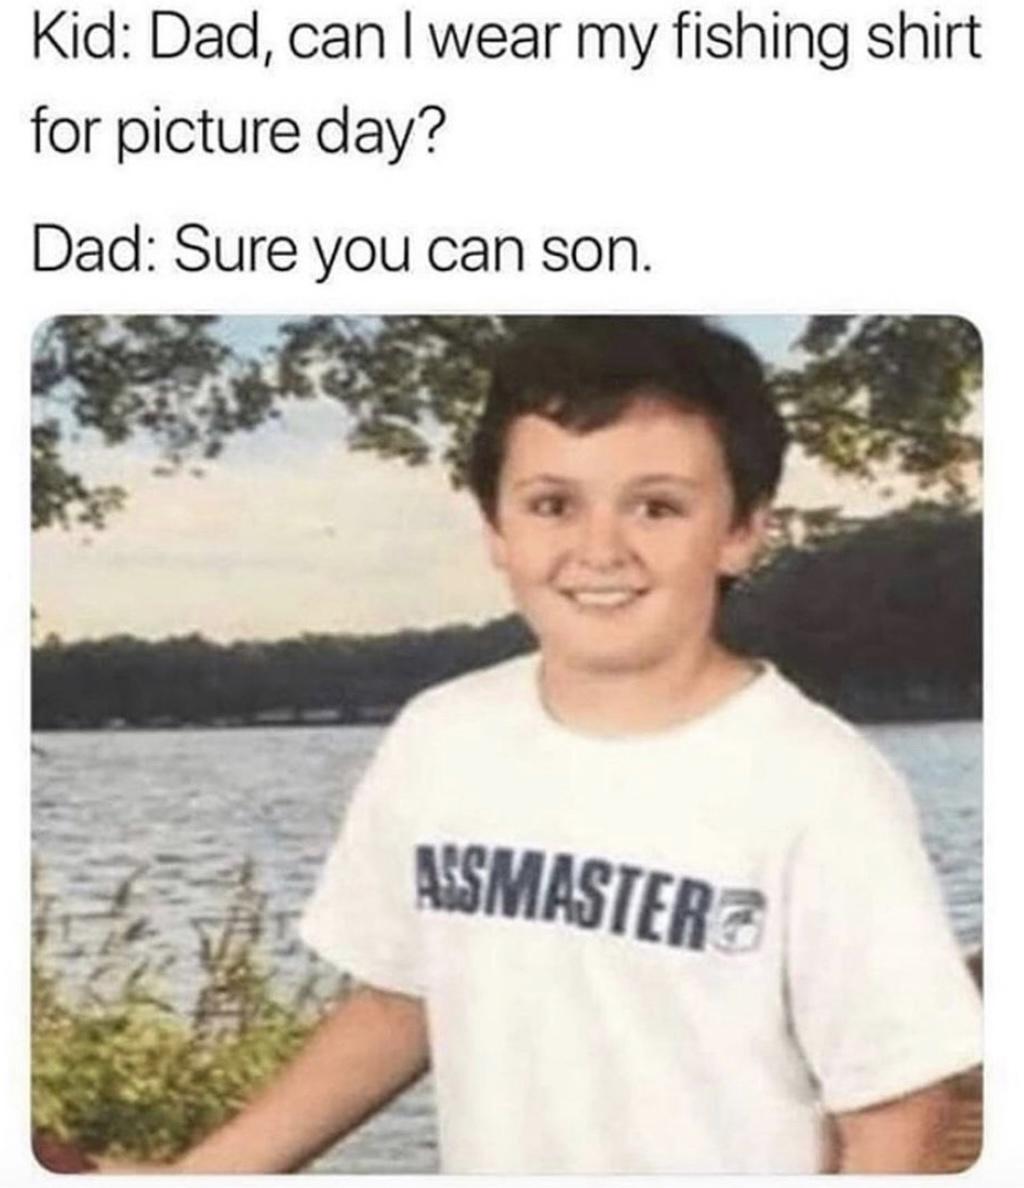 awesome pics and funny memes - dad can i wear my fishing shirt - Kid Dad, can I wear my fishing shirt for picture day? Dad Sure you can son. Arsmaster